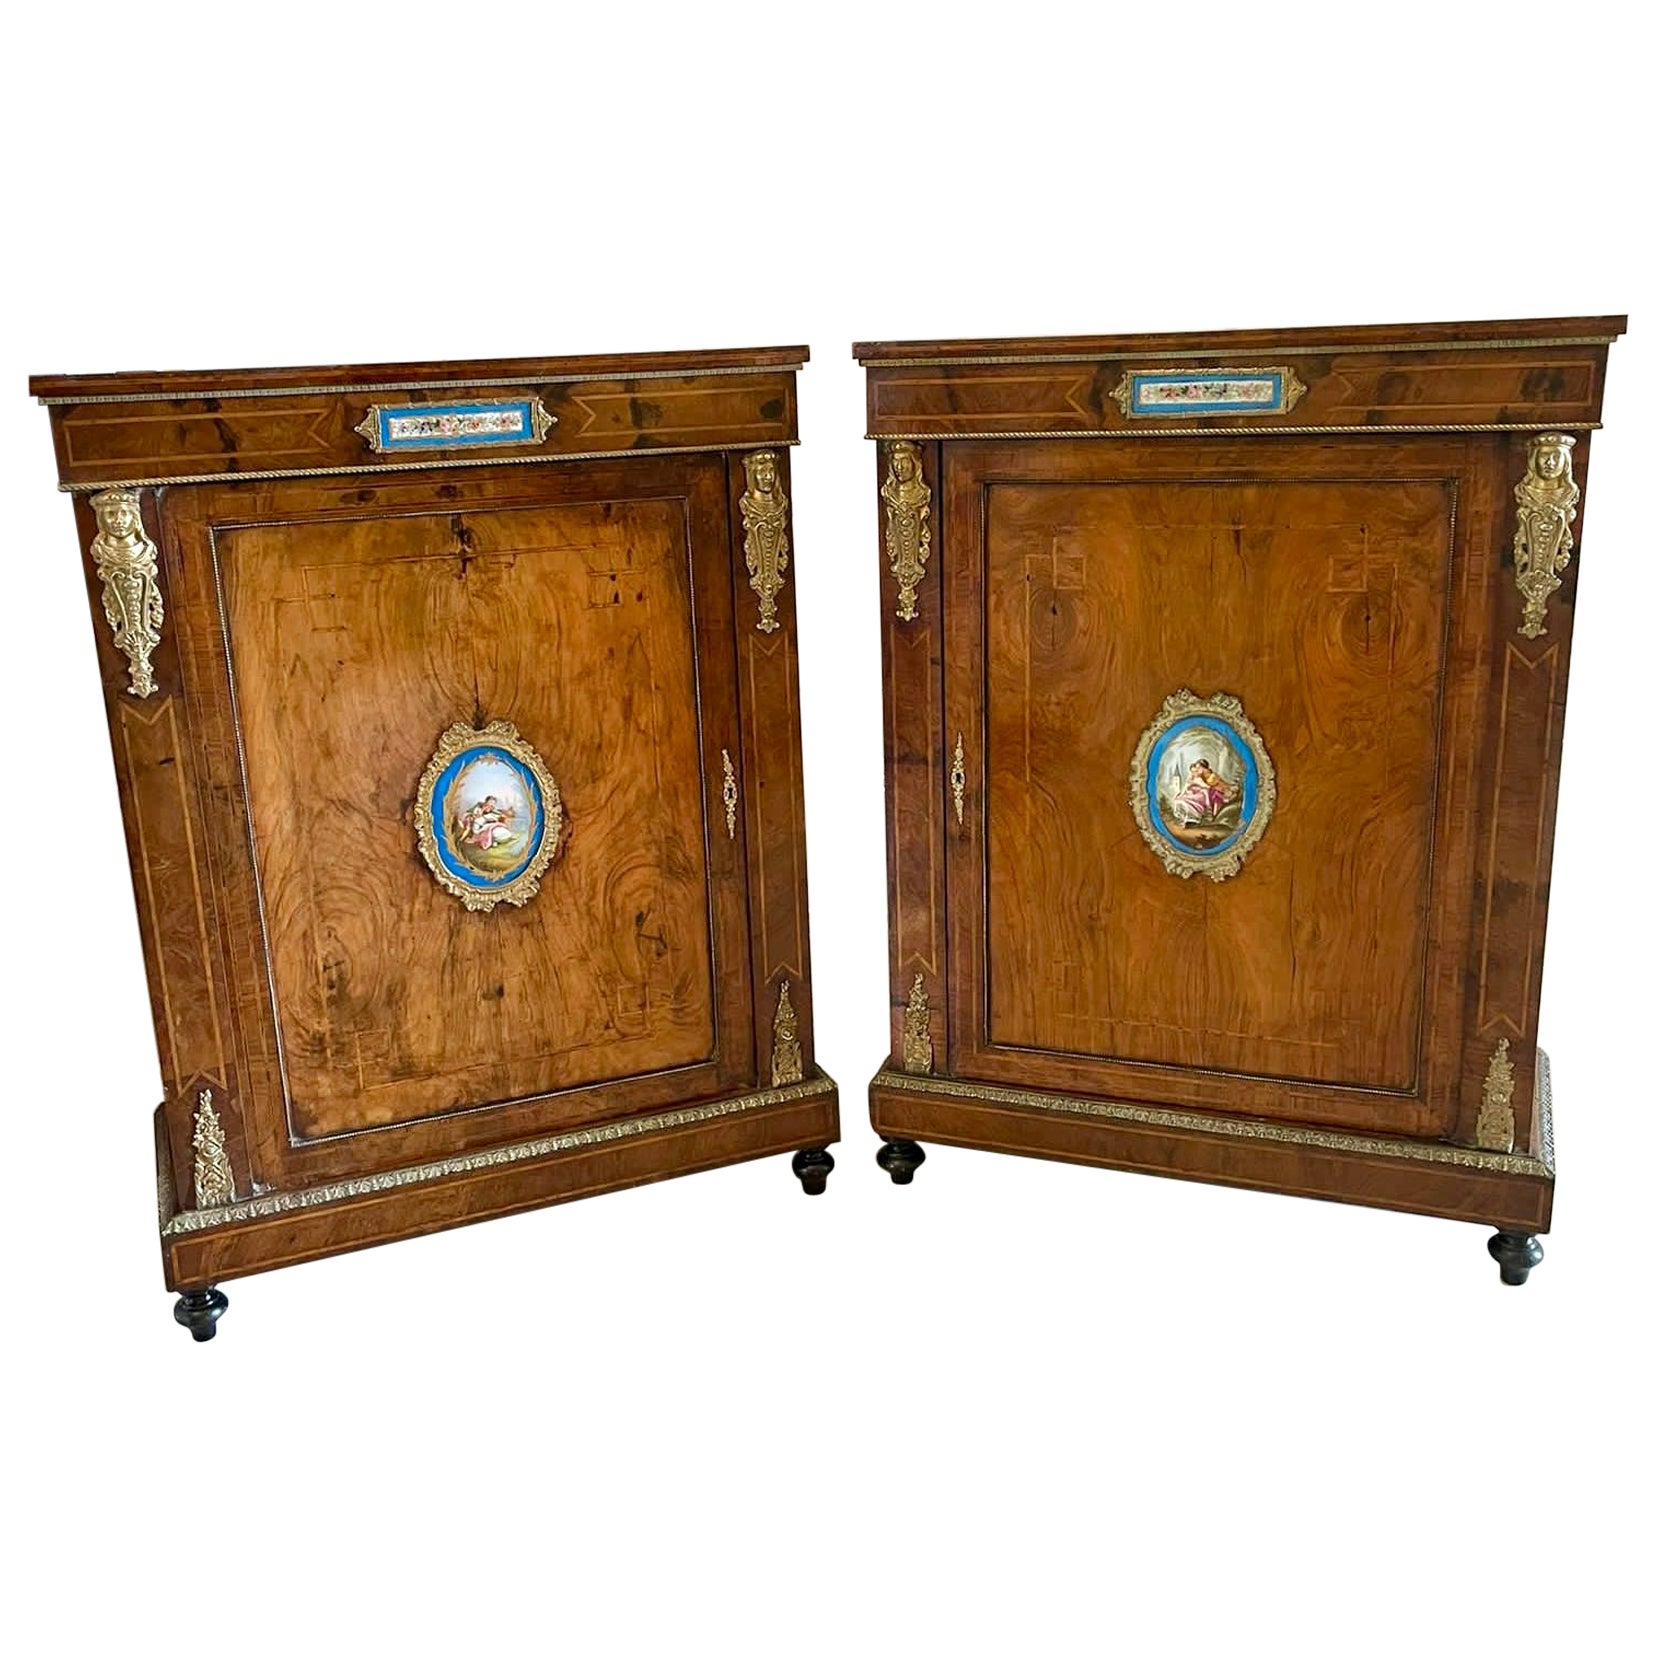 Fantastic Pair of Antique Inlaid Burr Walnut and Porcelain Mounted Pier Cabinets